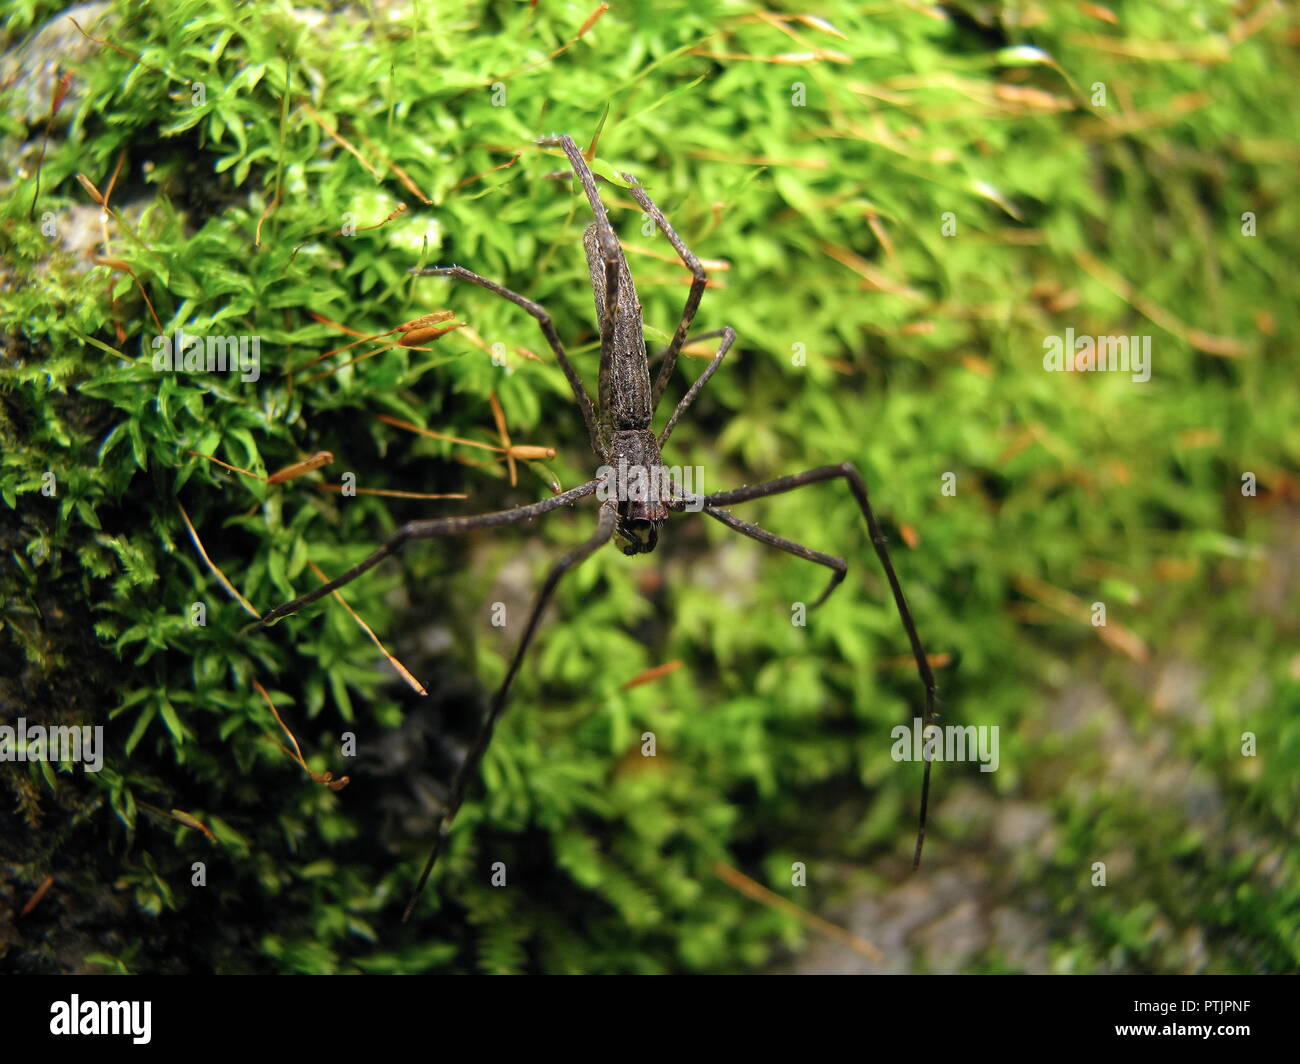 Macro of an ogre faced spider (Deinopis) over green moss Stock Photo